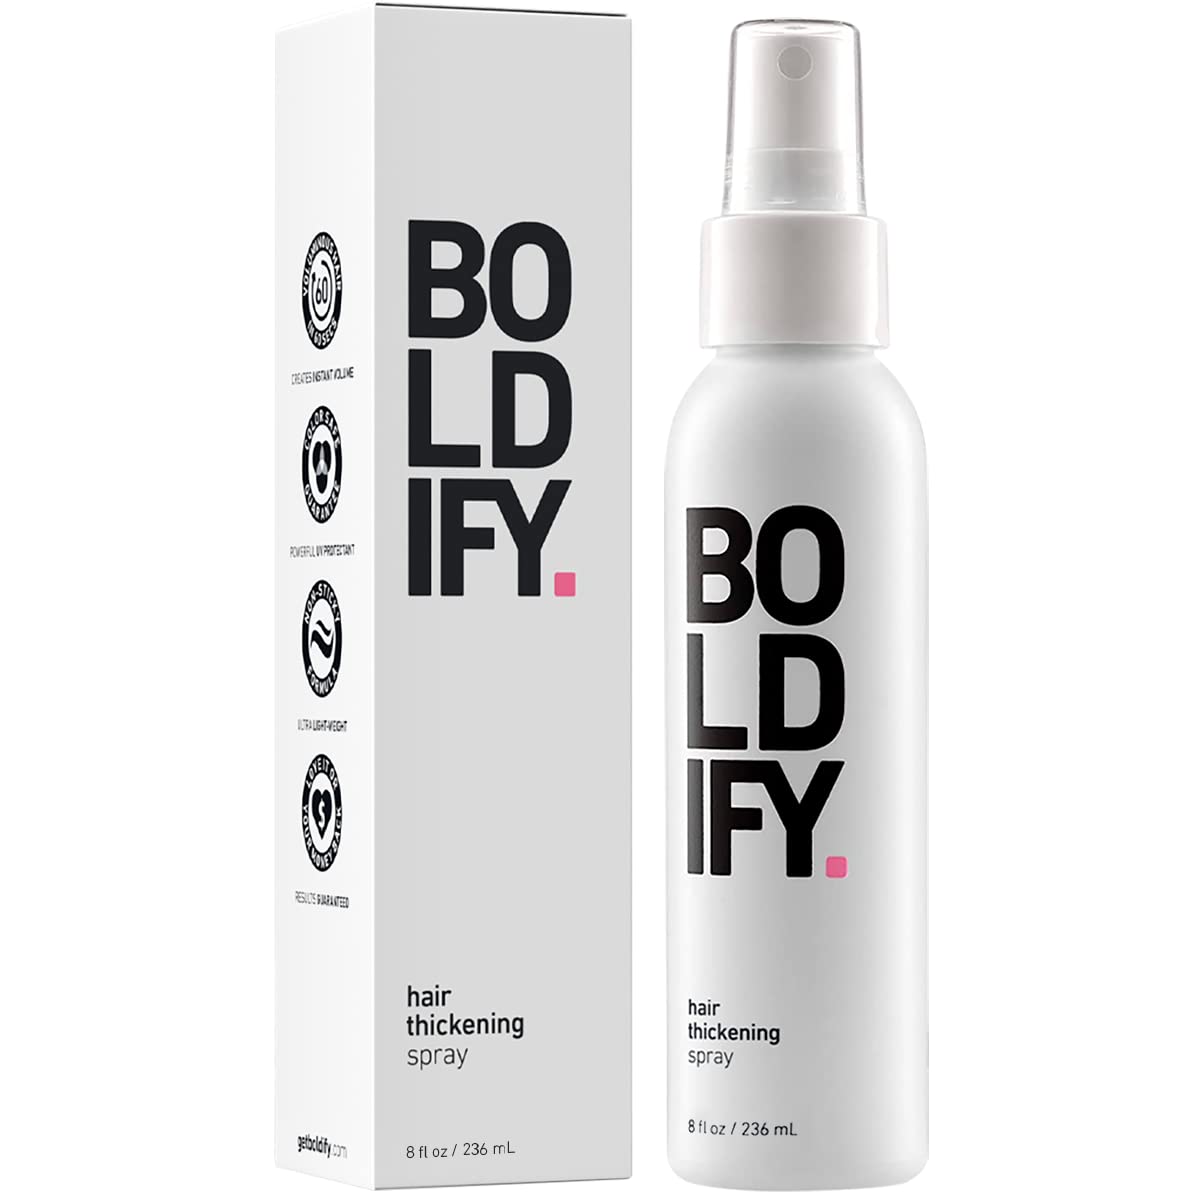 Boldify Hair Thickening Spray - Stylist Recommended Volumizing Hair Products All Genders - Hair Volumizer, Texture Spray for Hair, Hair Spray Women/Men, Hair Thickening Products for Women & Men - 8oz